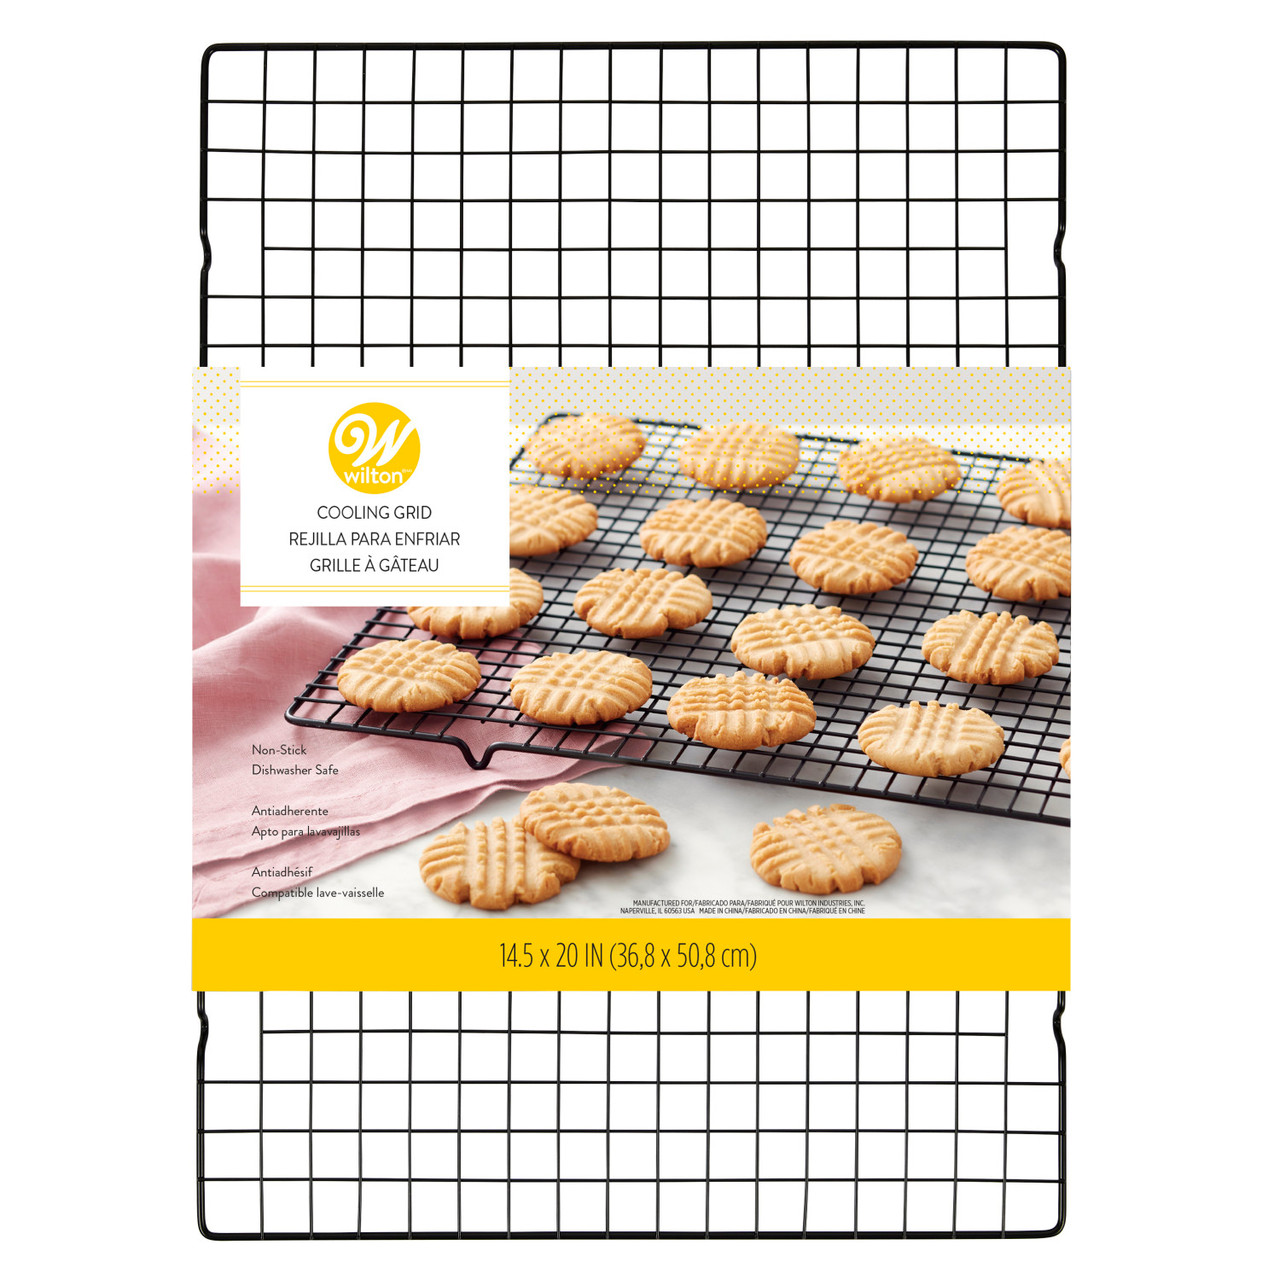 Nordic Ware Cooling Grid 13 X 20 in IA